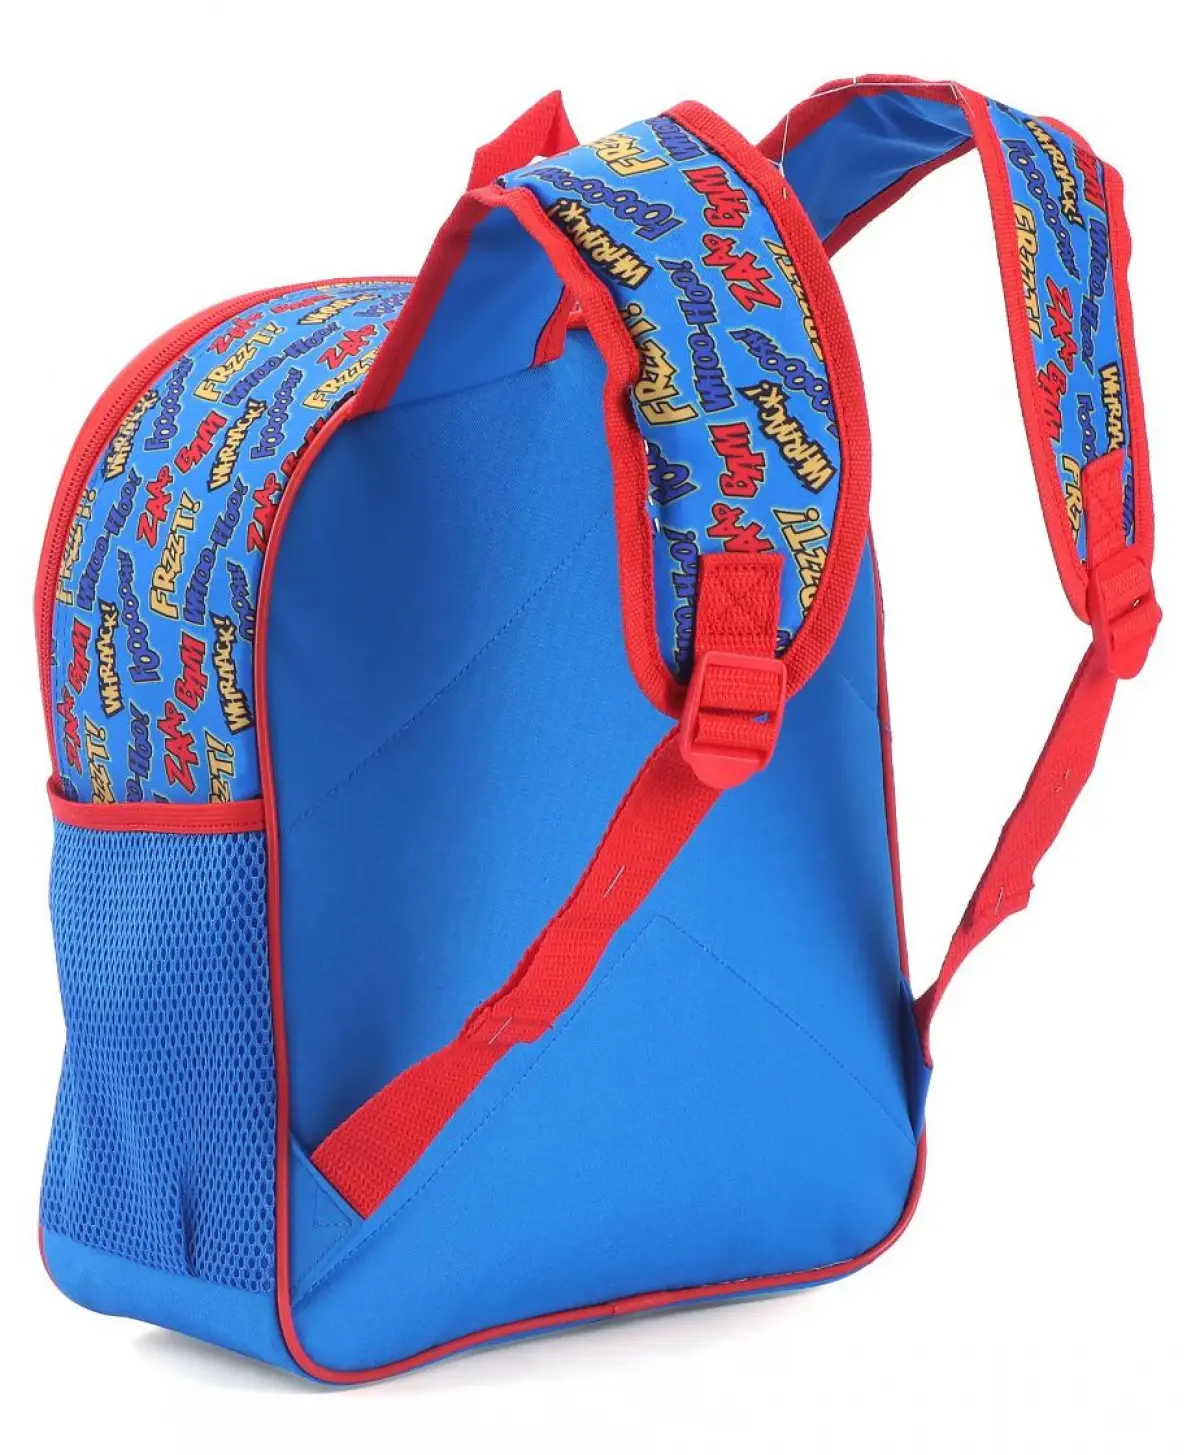 Striders 13 inches Spiderman School Bag Inspire Learning with Spider-Man's Style Multicolor For Kids Ages 2Y+